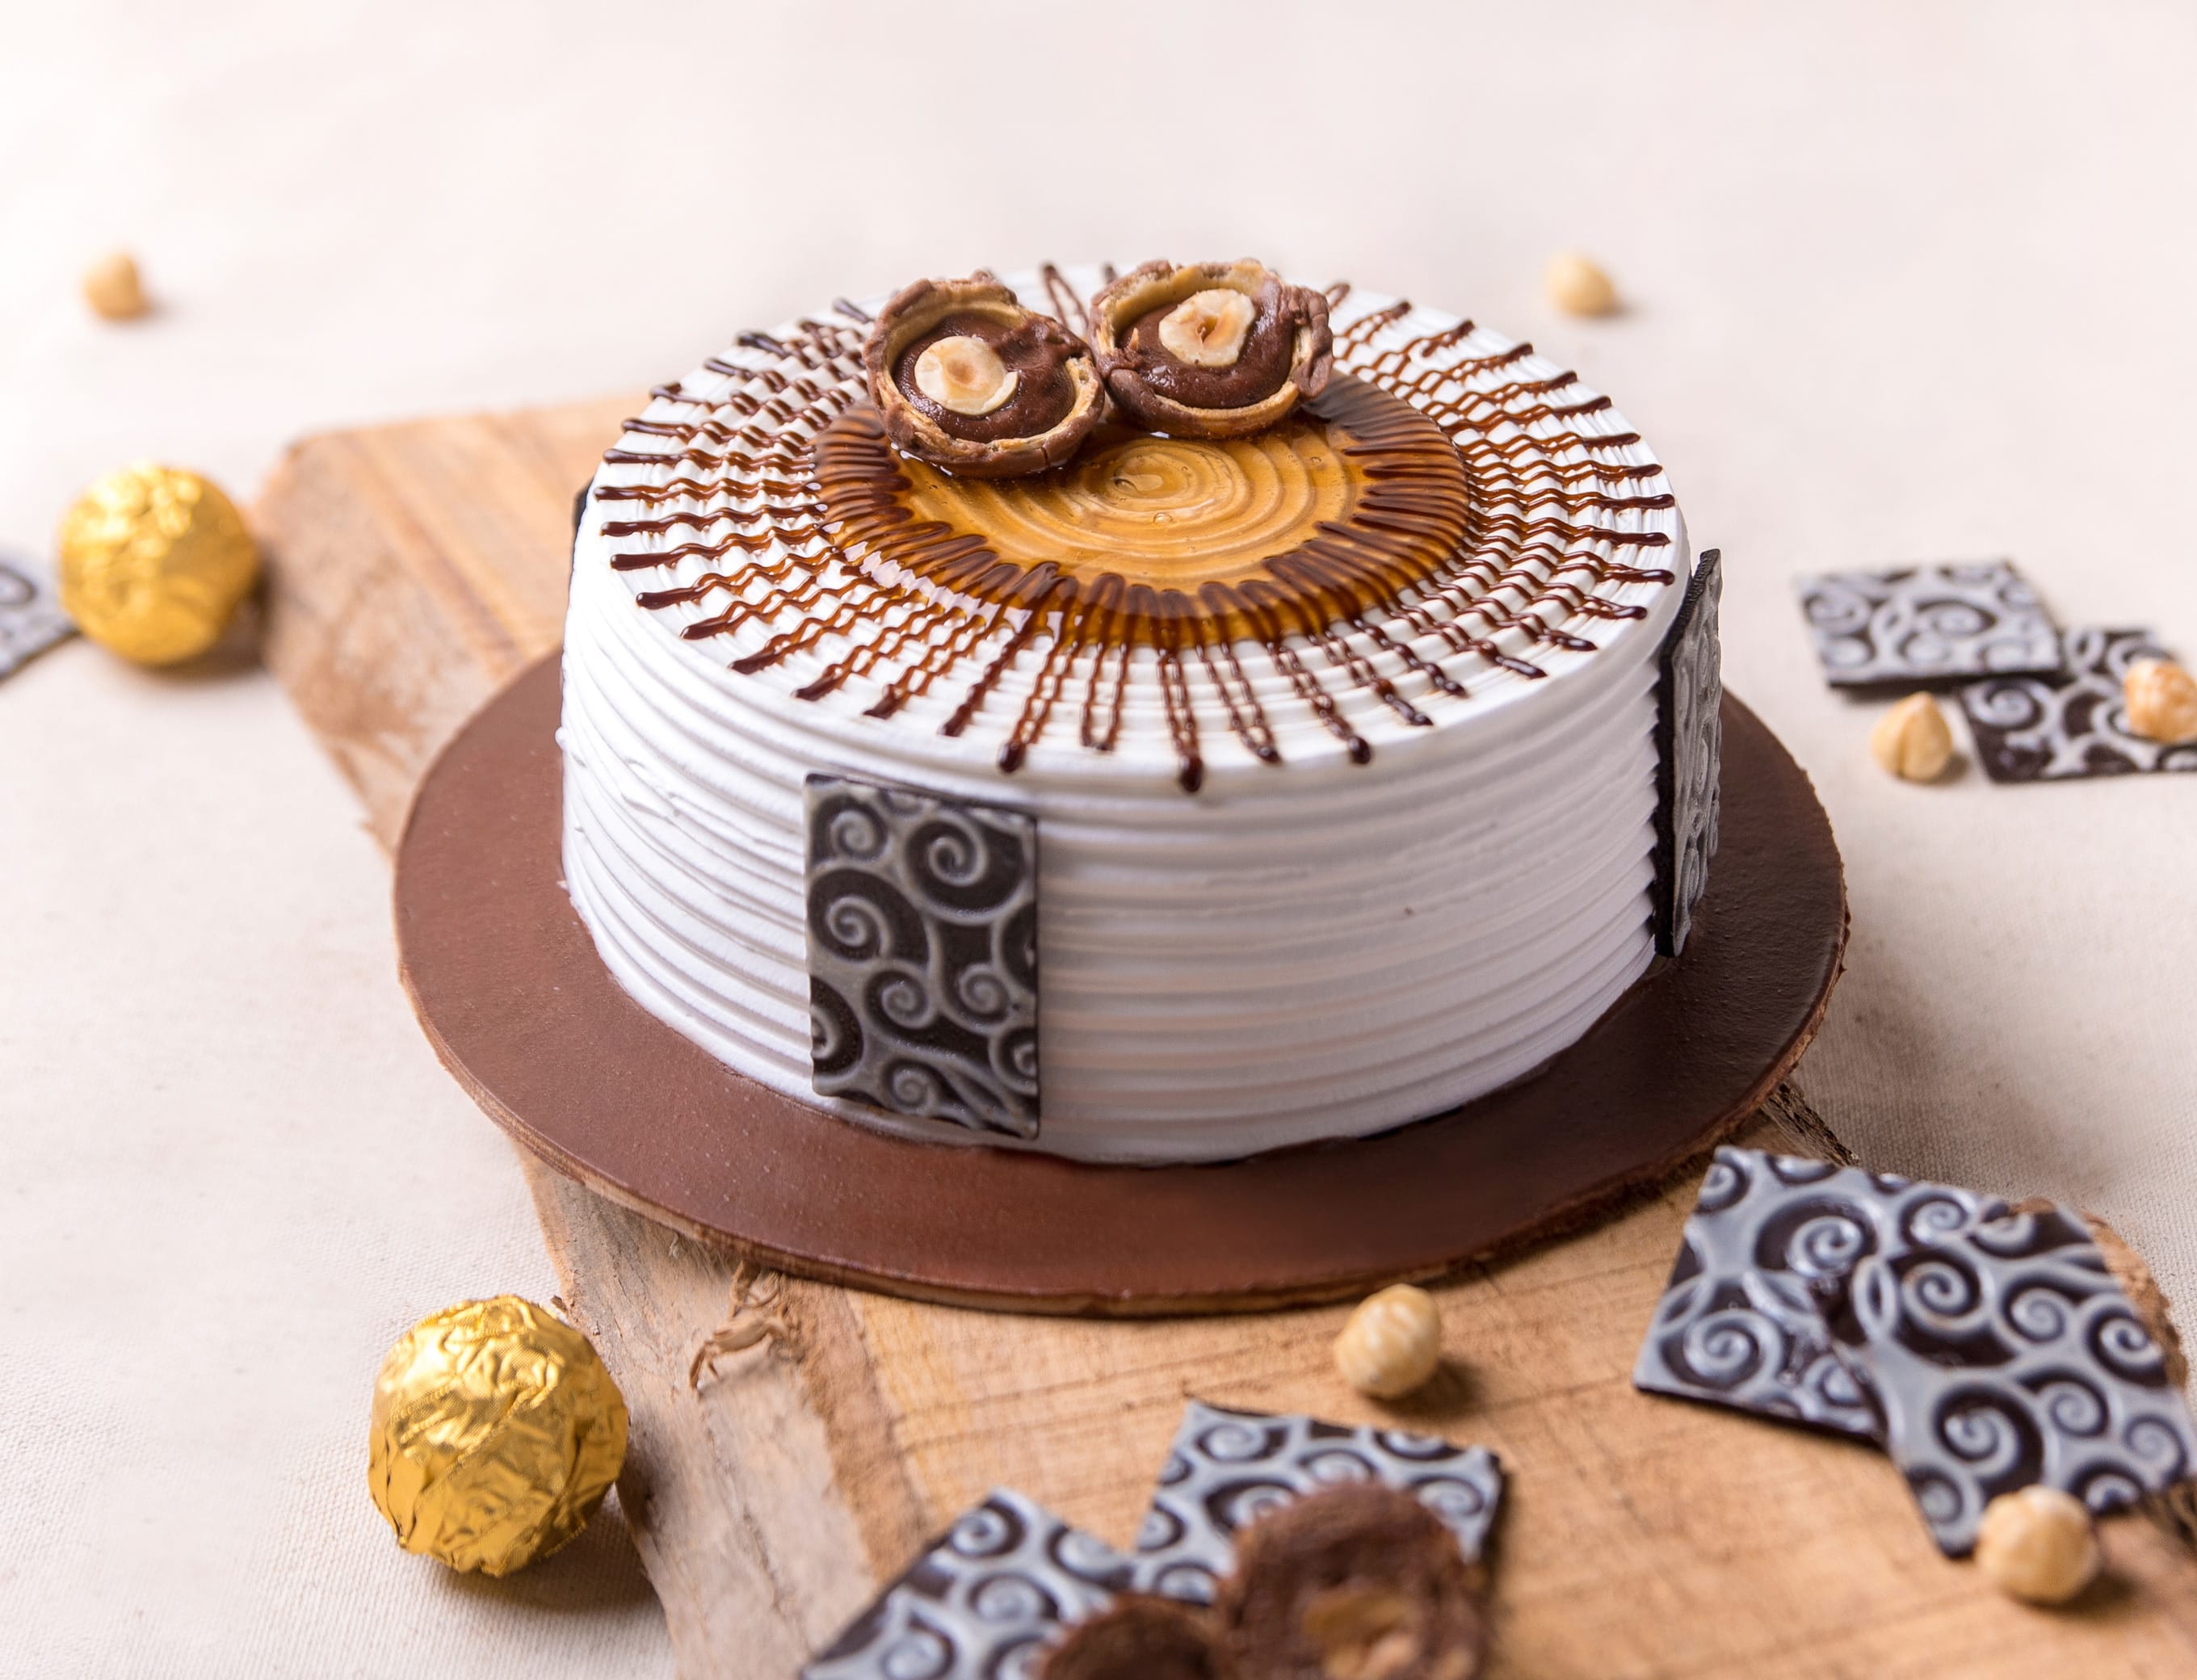 Monginis India - Our hazelnut cake is made with freshly roasted & ground  whole hazelnuts to give it the perfect nutty yet nuanced flavour! Try it  today! #TasteTheNew #ExoticCake #Cakes #Dessert #Monginis #